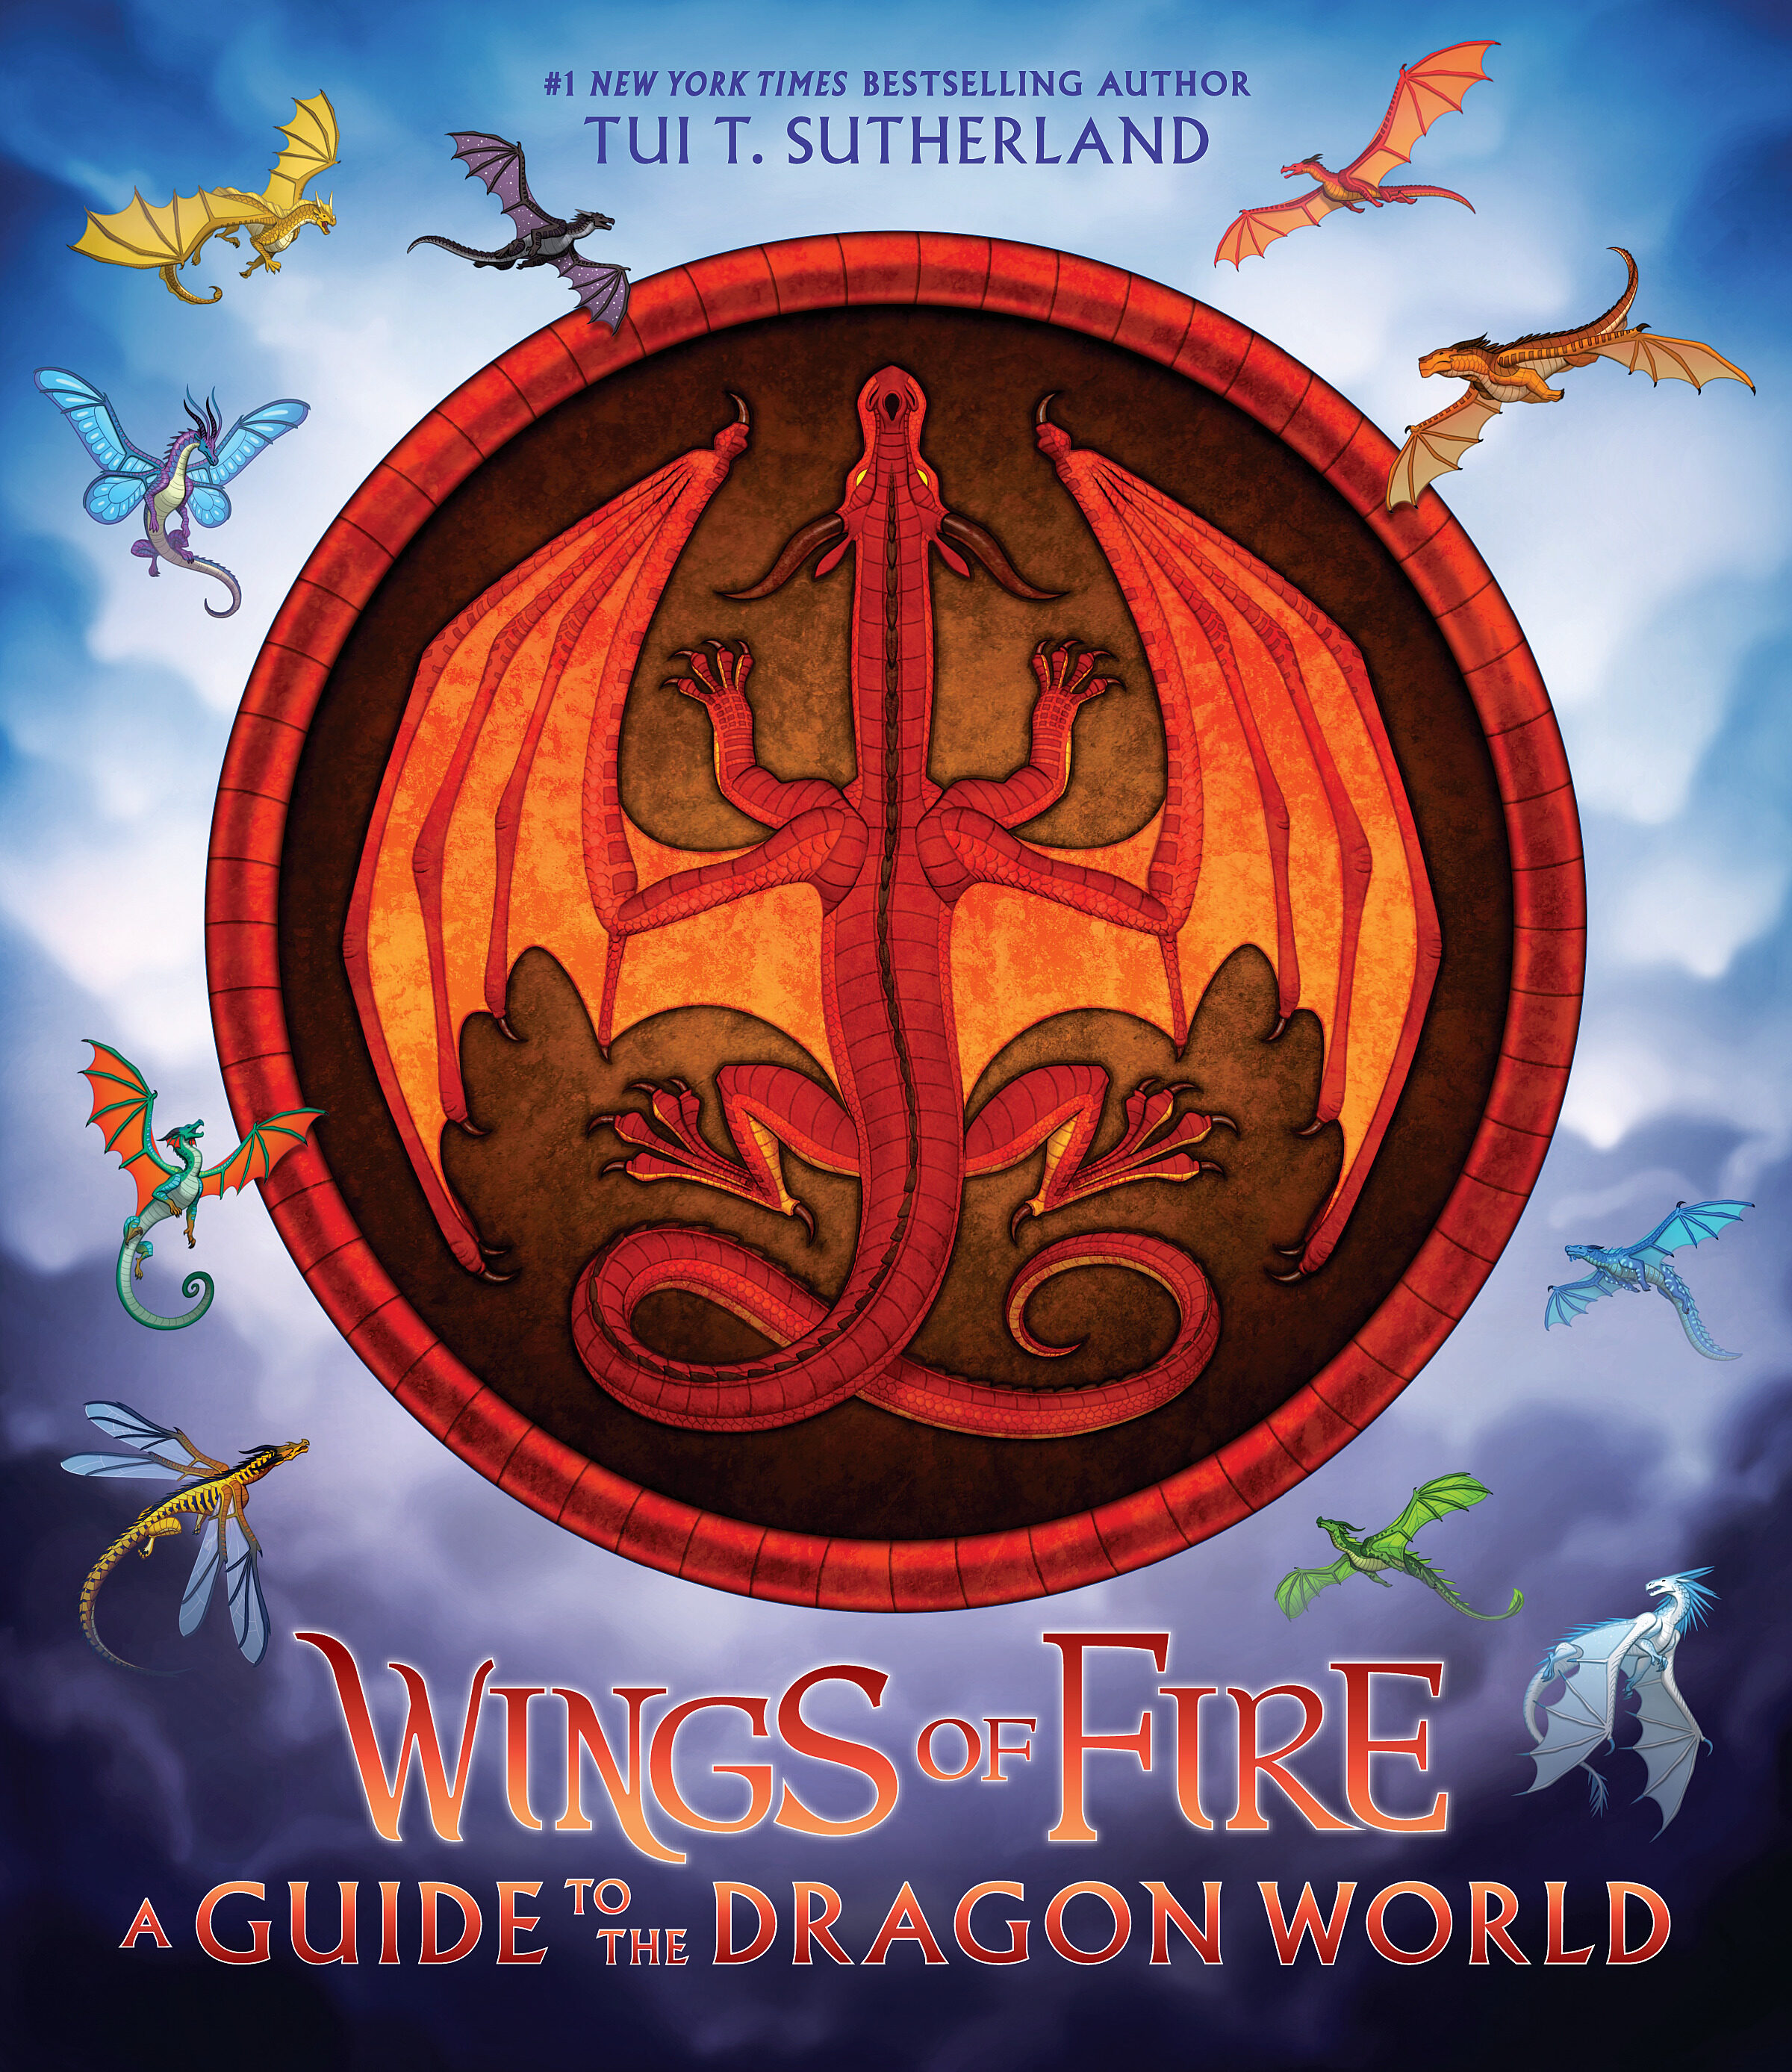 A Guide to the Dragon World, Wiki Les Royaumes de Feu